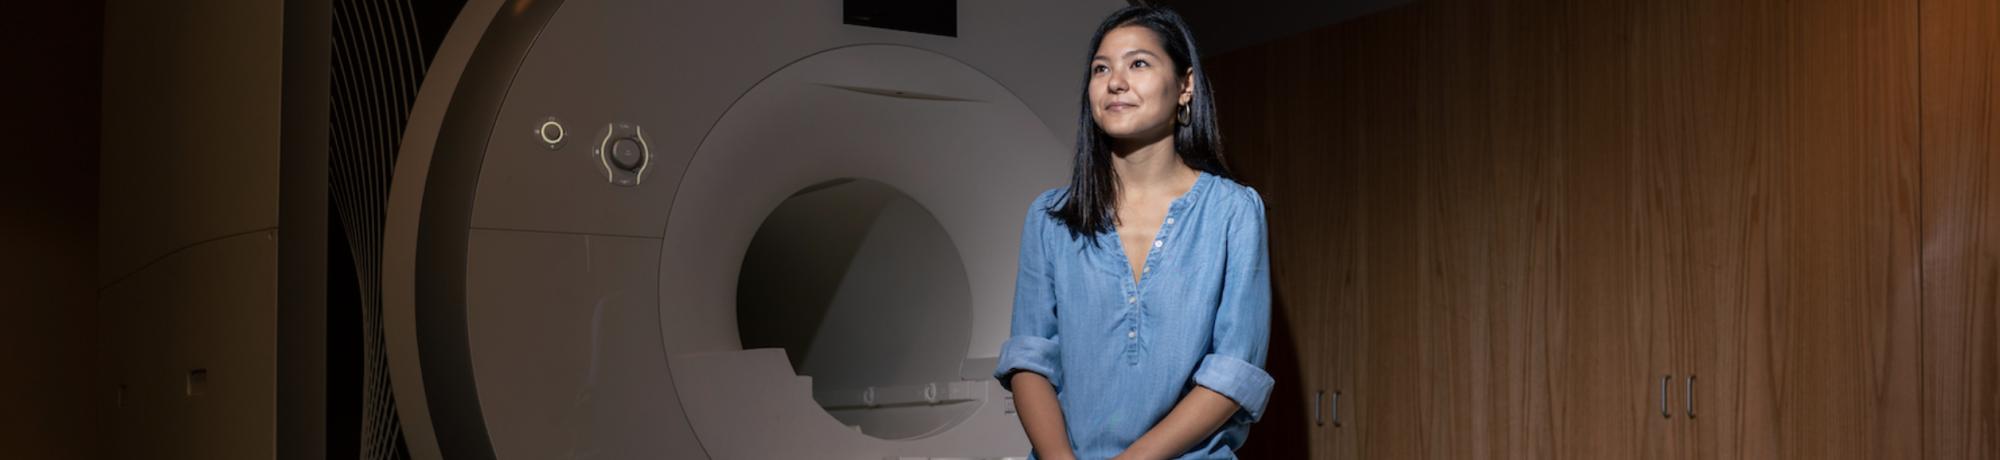 Olive-skinned woman with long black hair, wearing a light blue shirt sits in front of an MRI scanner. She is smiling looking off into the distance. 